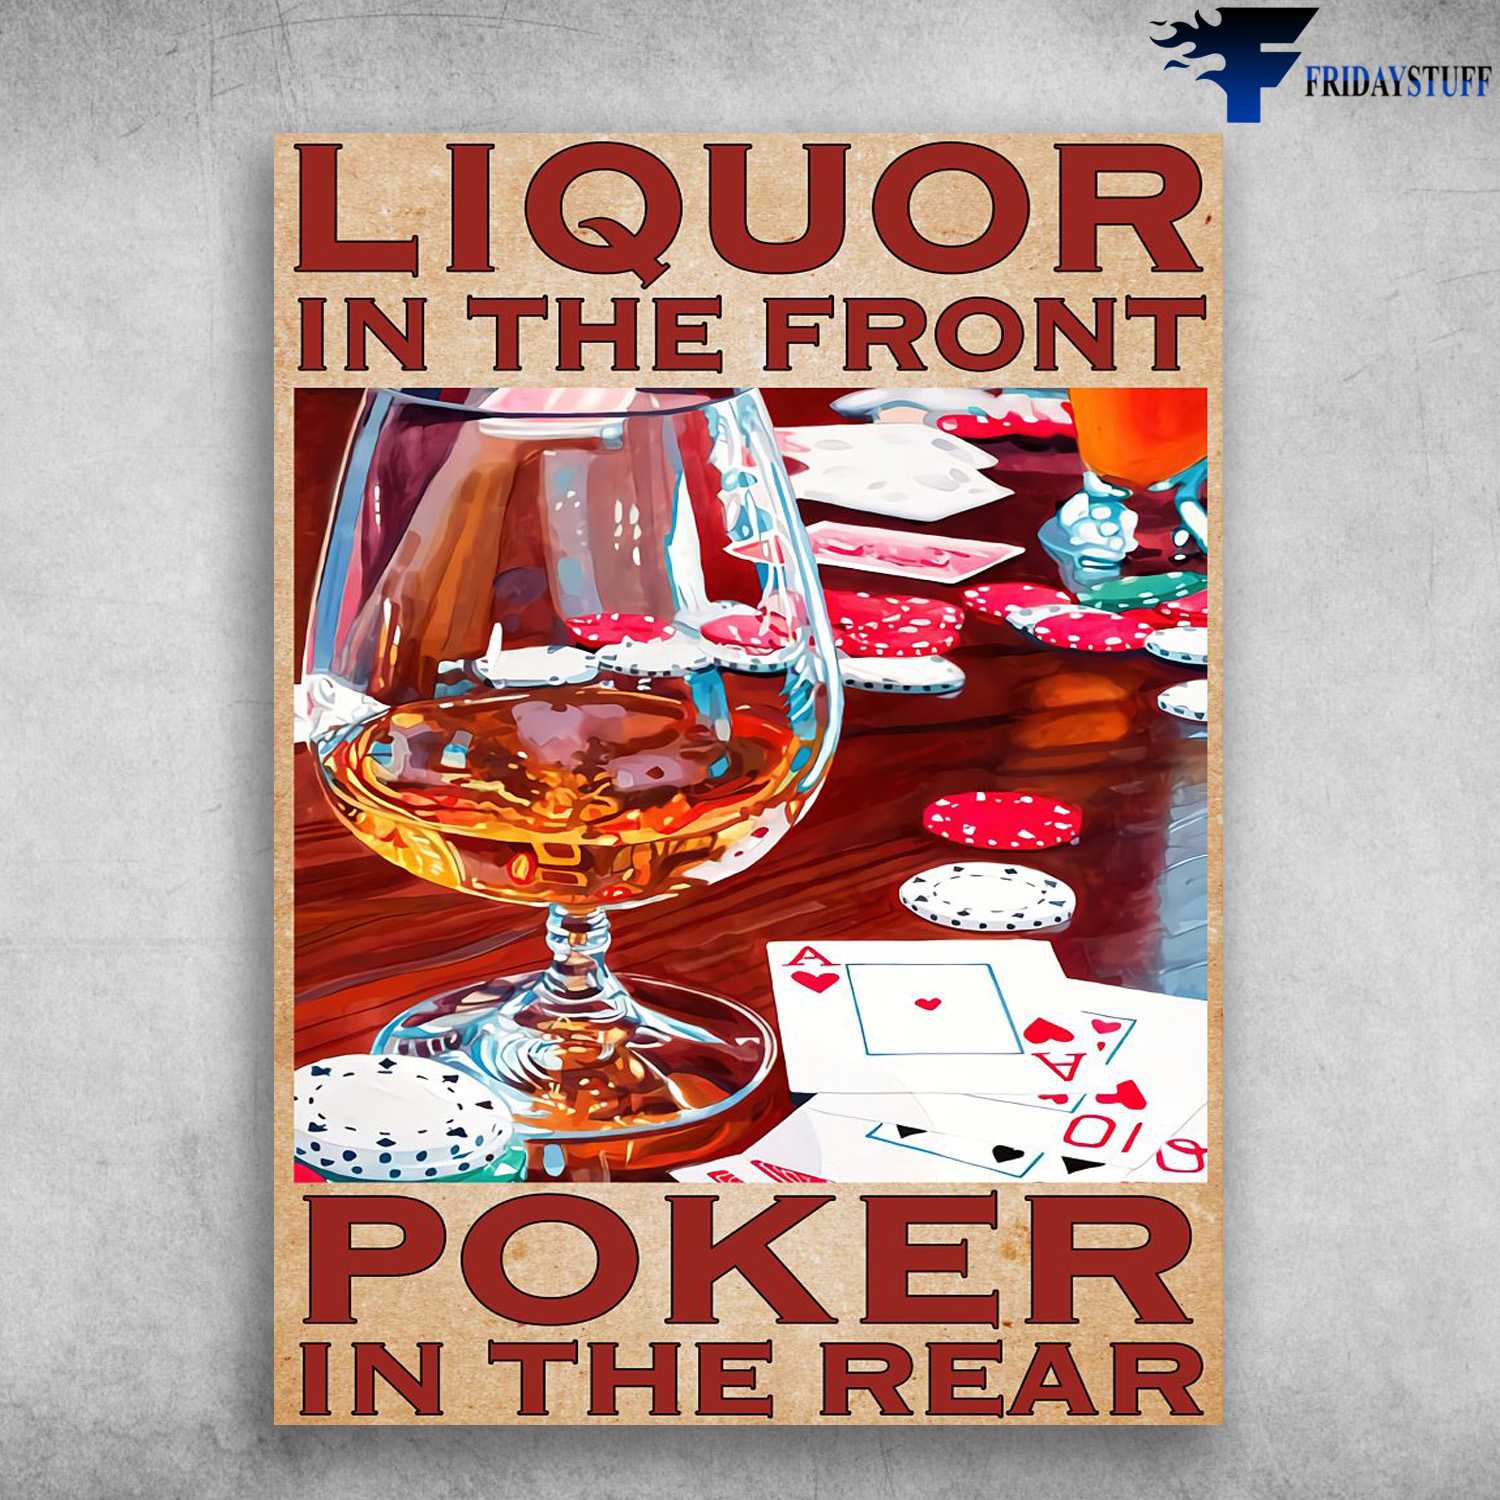 Poker And Wine, Wine Lover, Liquor In The Front, Poker In The Rear